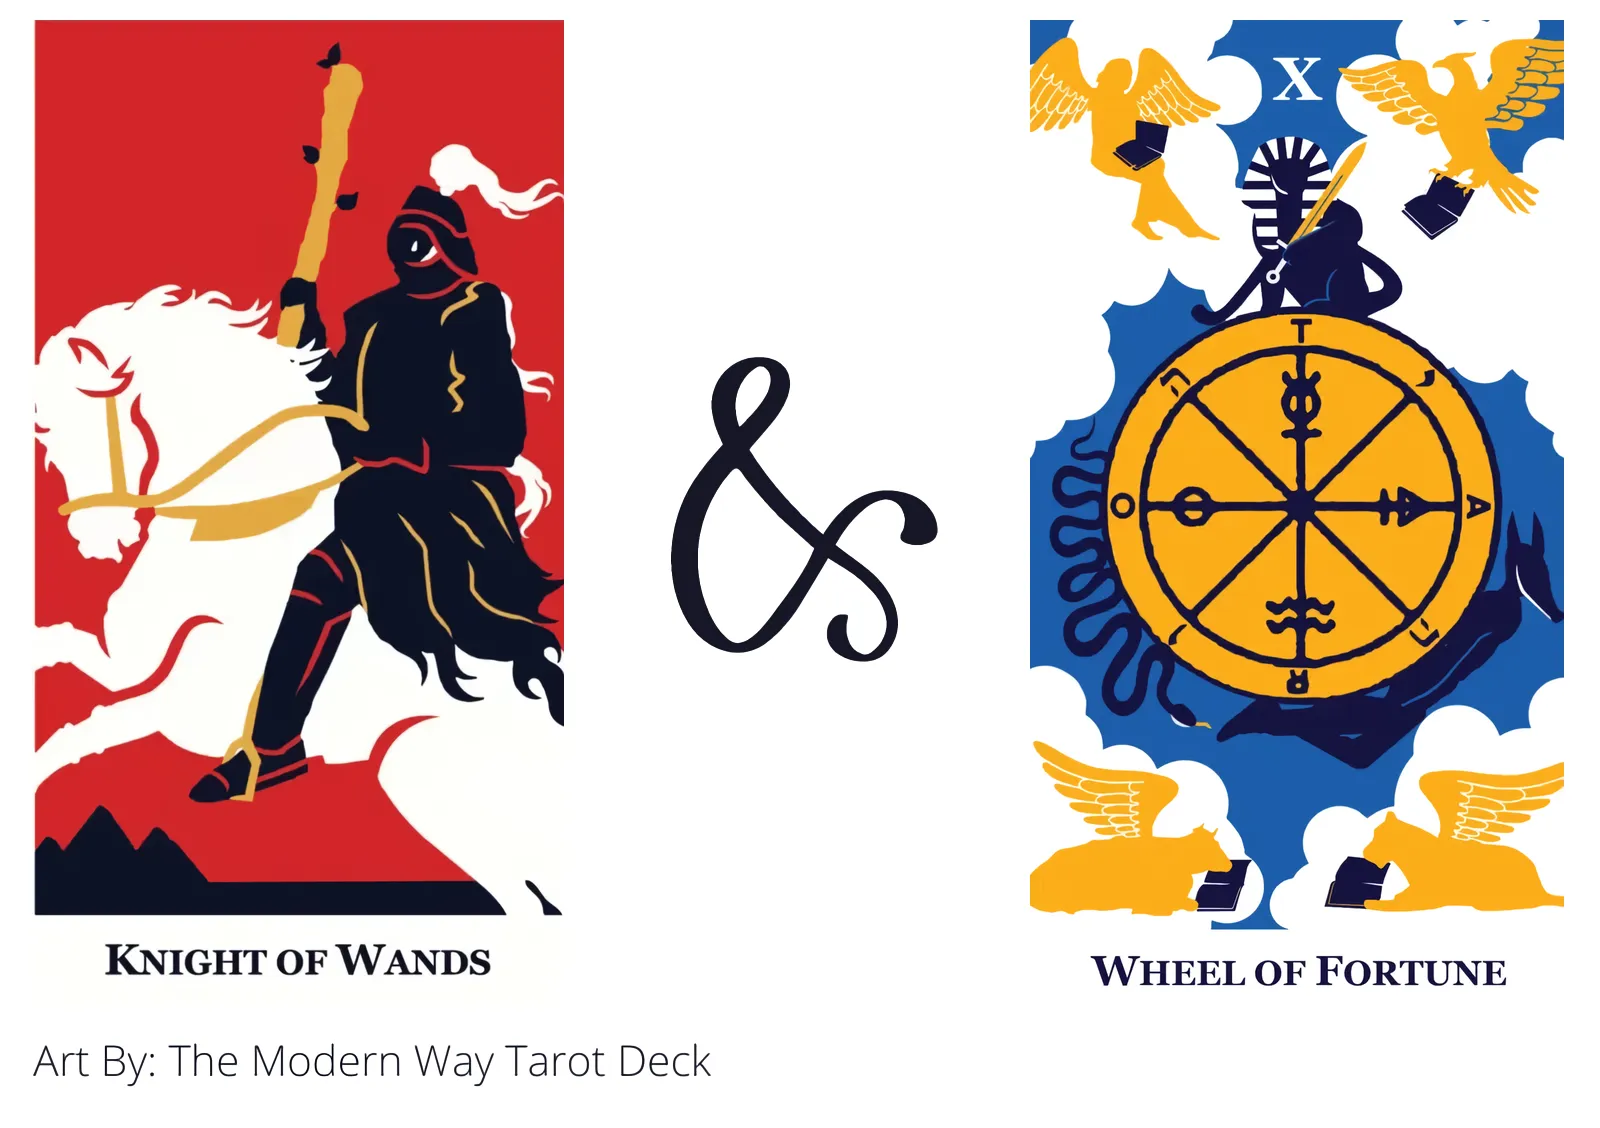 knight of wands and wheel of fortune tarot cards together